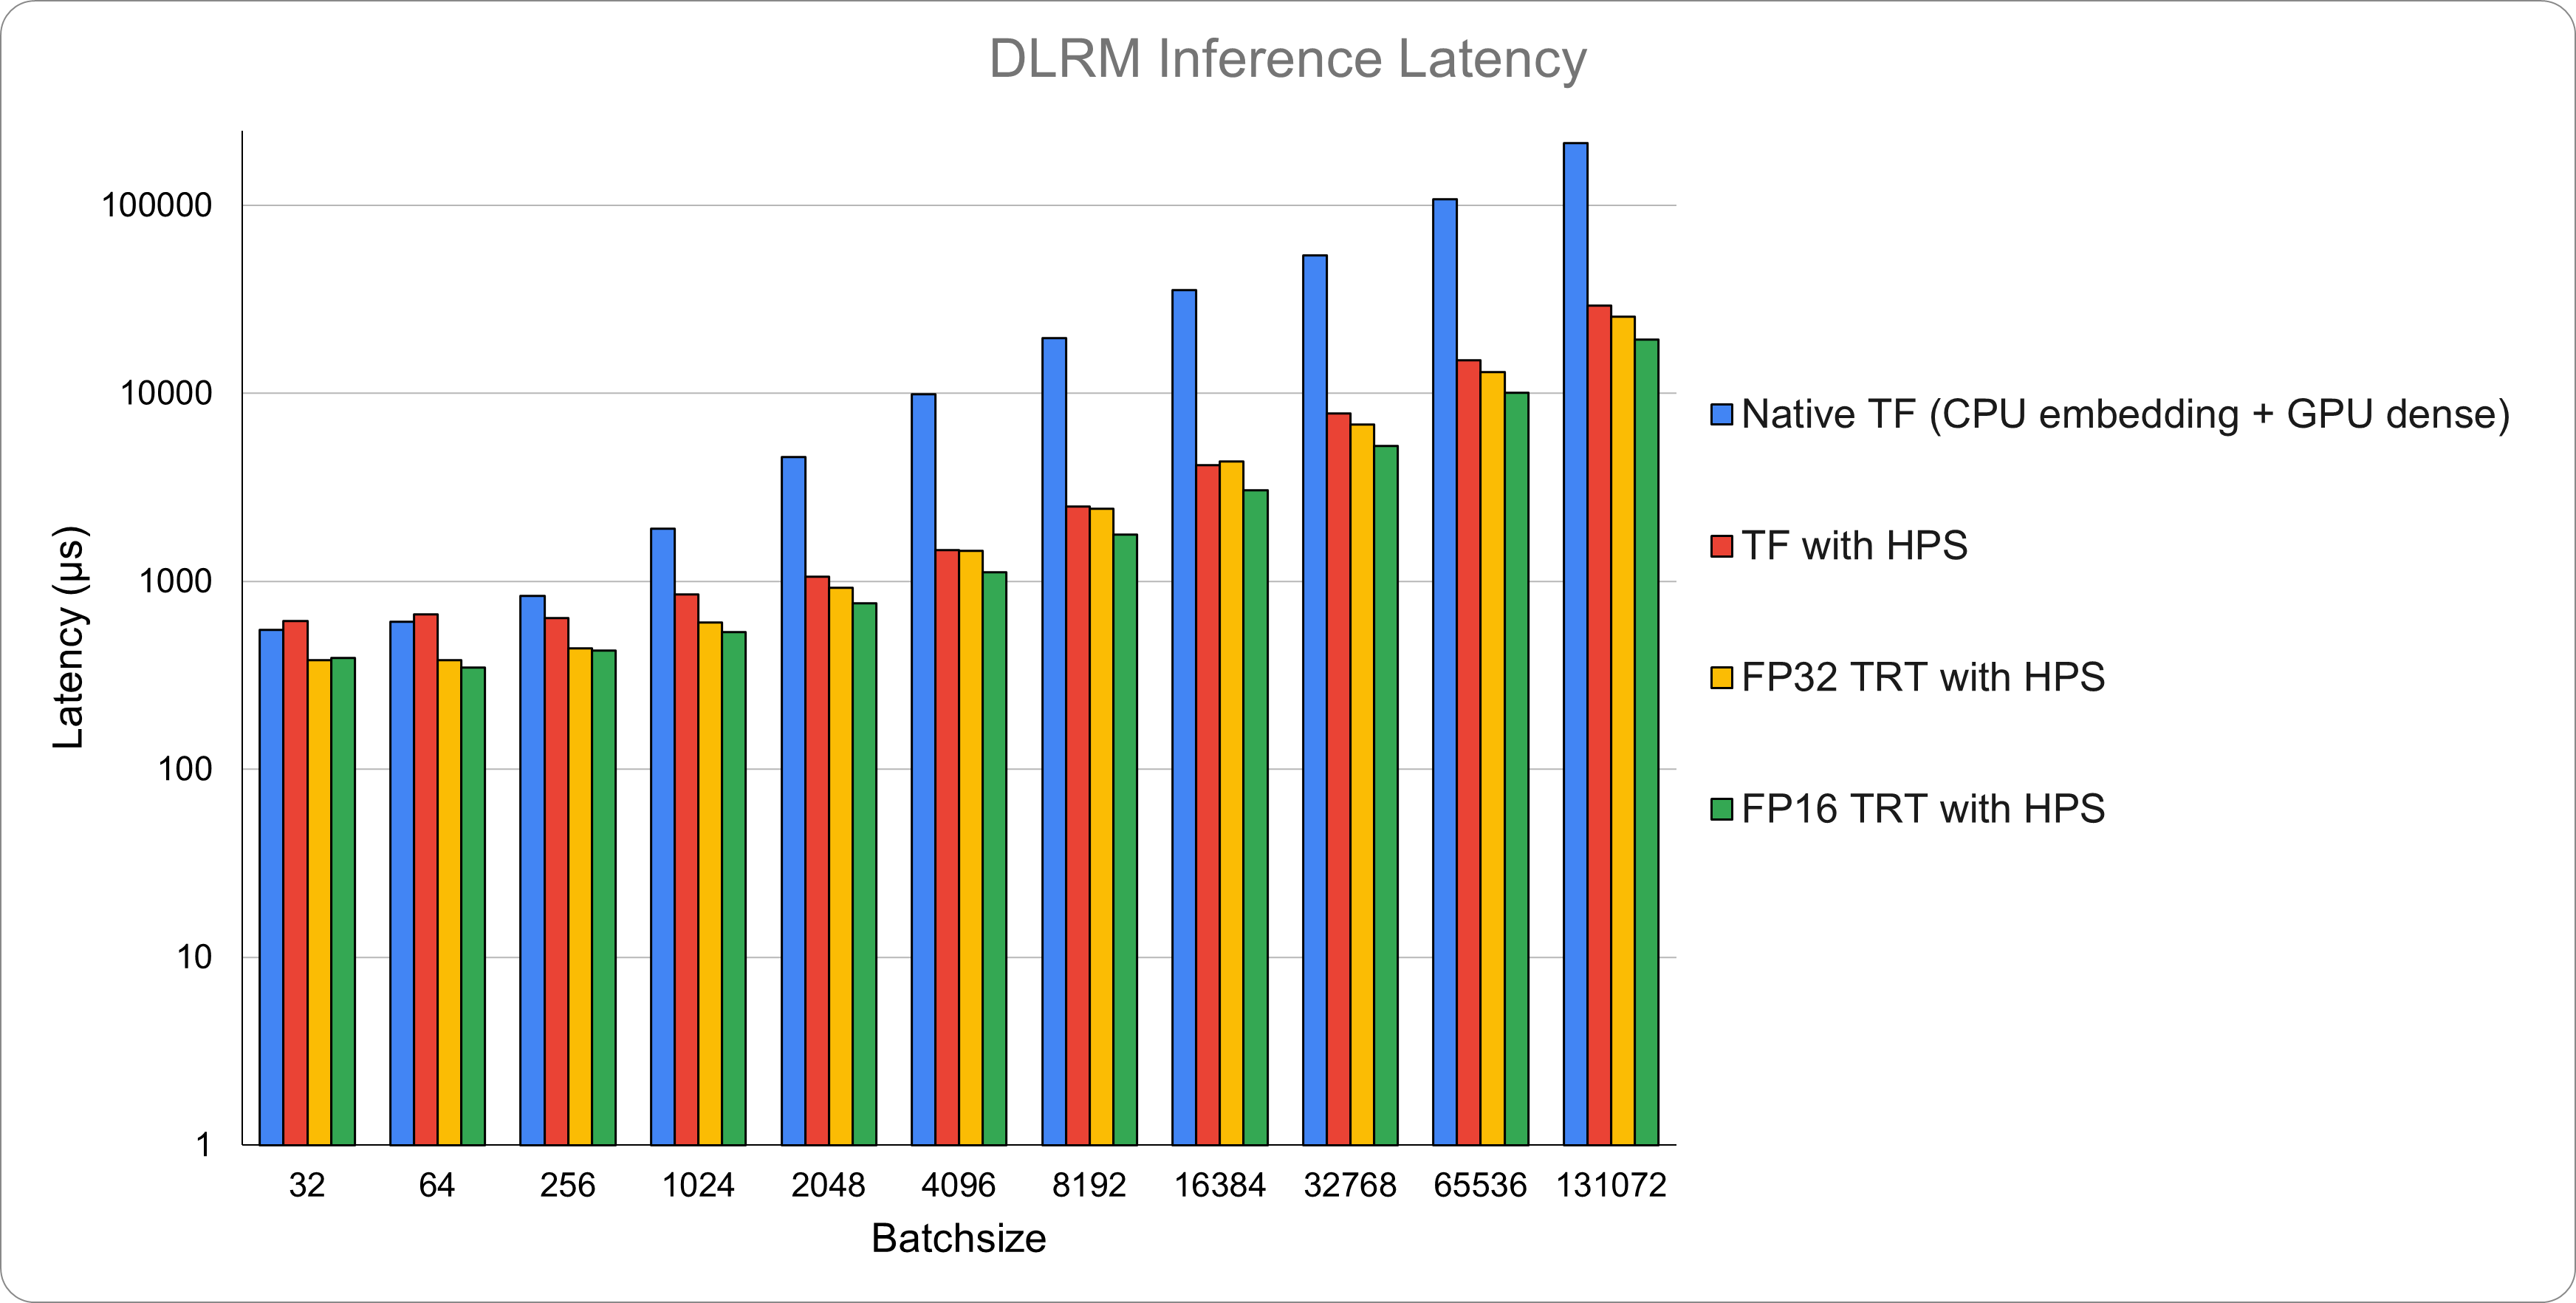 The DLRM inference latency for different deployment methods